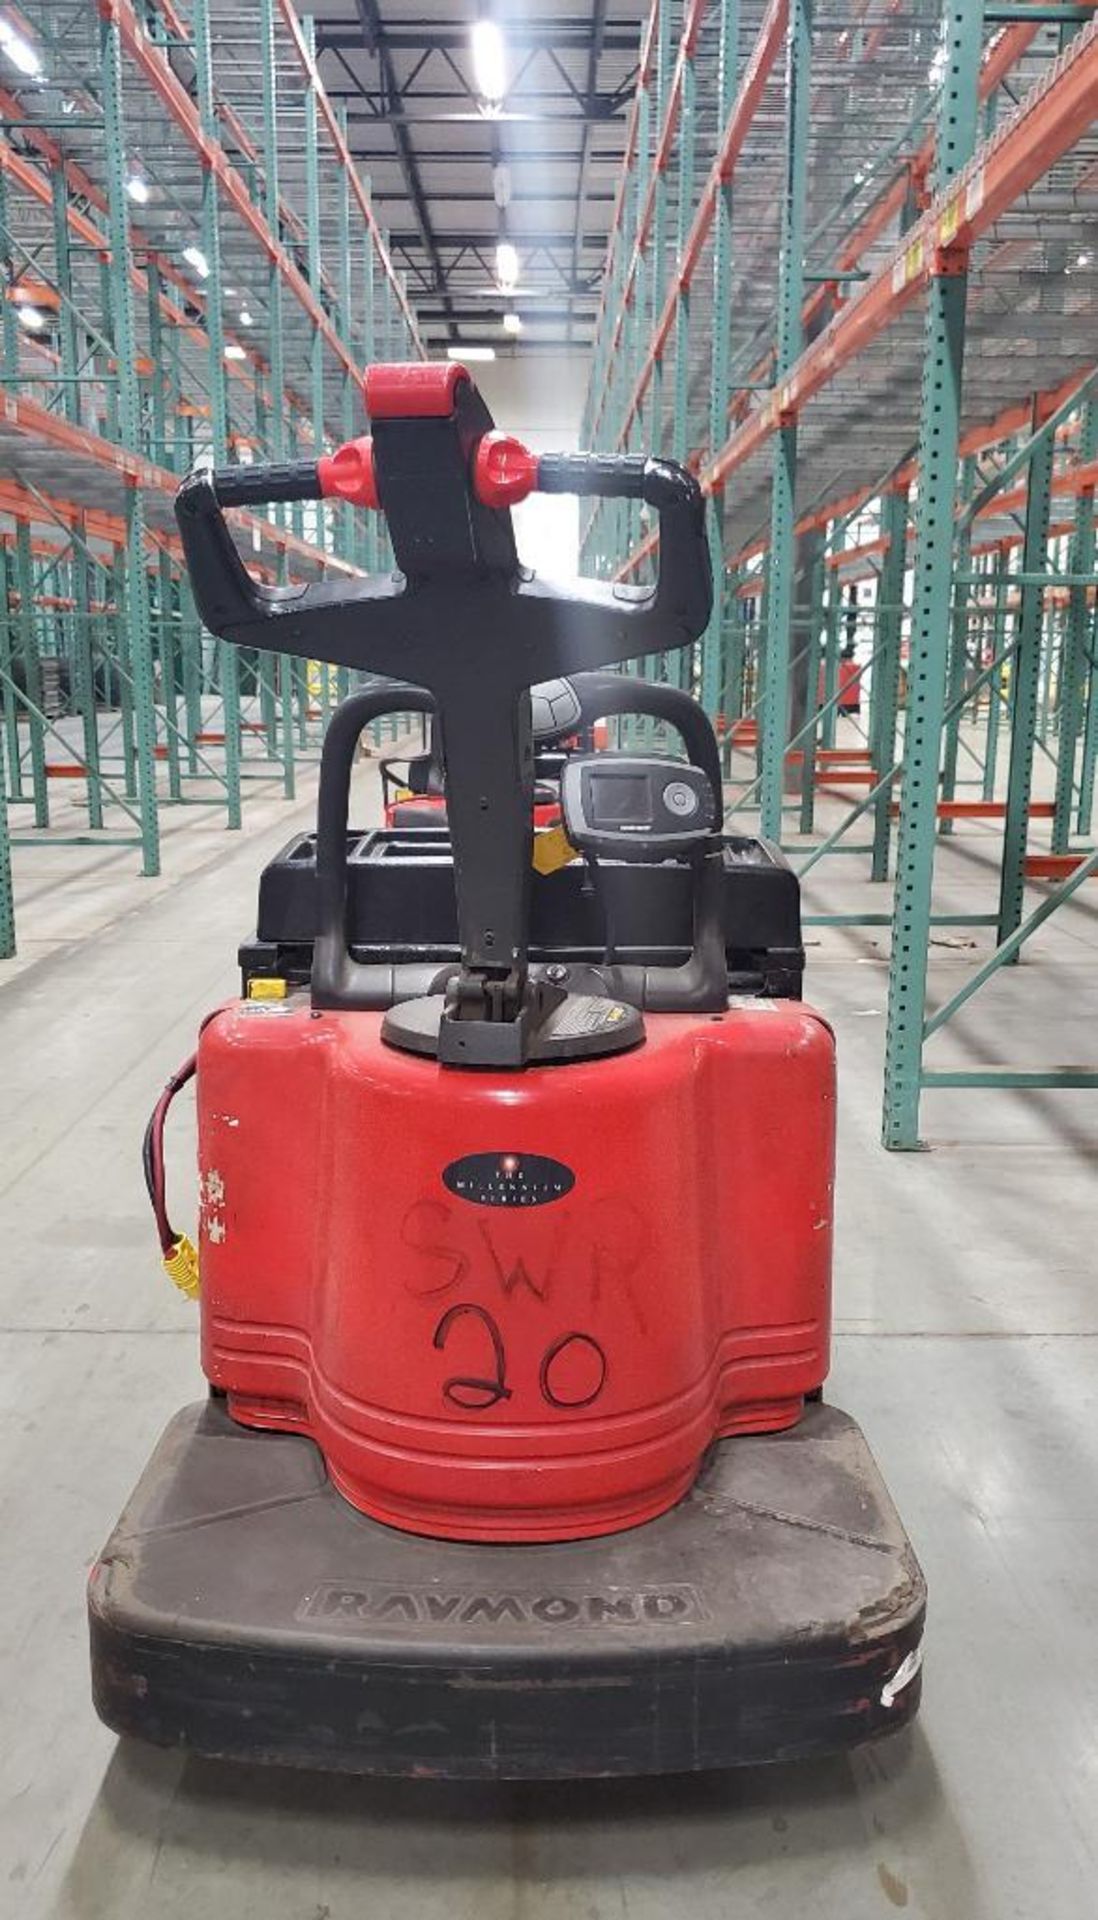 2002 RAYMOND 6,000 LB. CAPACITY ELECTRIC PALLET TRUCK; MODEL 112TM-FRE60L, S/N 112-02-42349, WITH